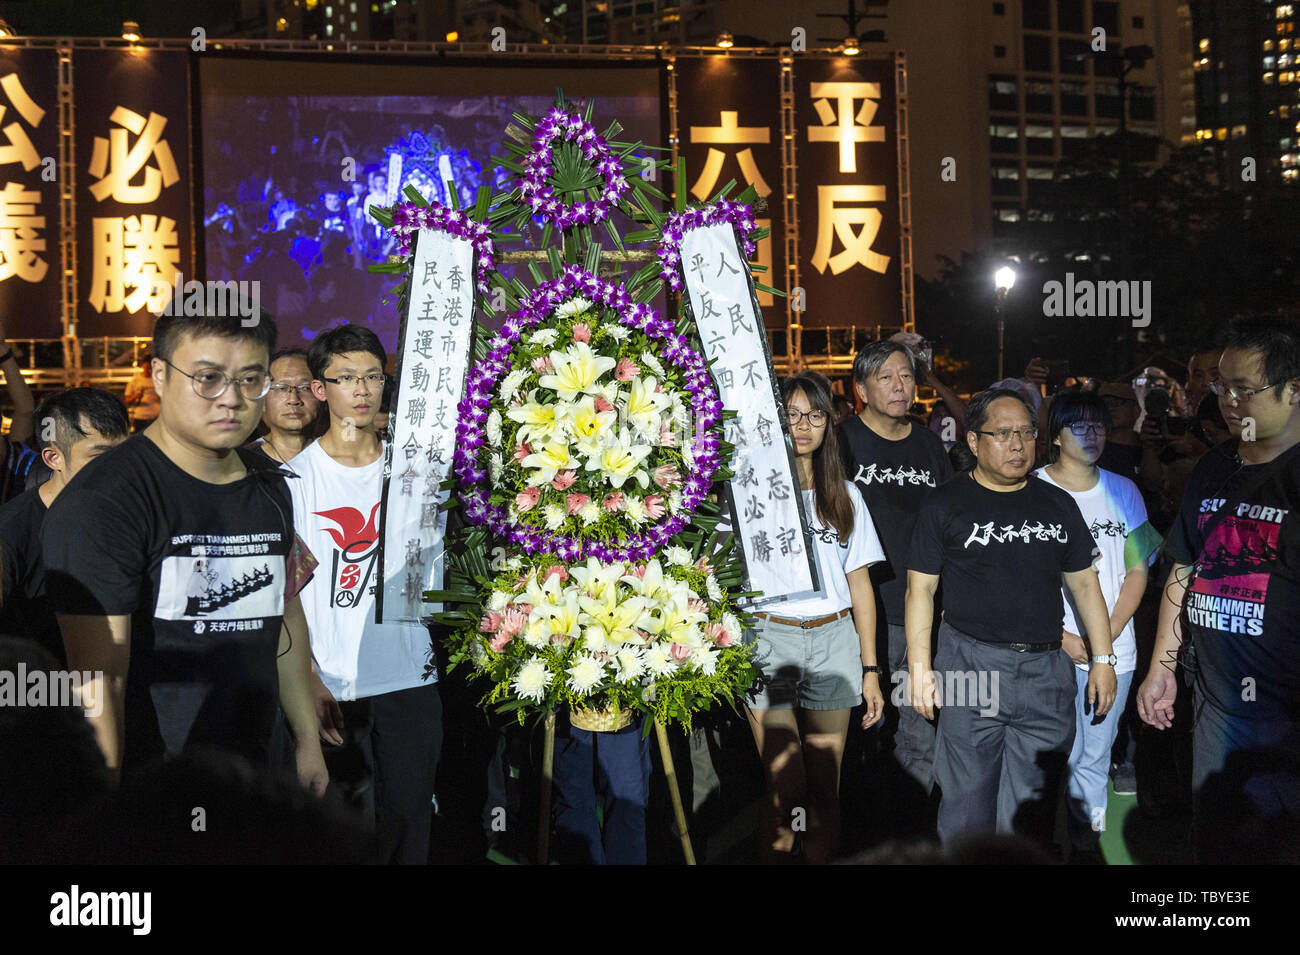 Hong Kong, Hong Kong SAR, CHINA. 4th June, 2019. Students march the wreath to the memorial cenotaph.A candlelit vigil takes place in Hong Kong's Victoria Park to mark the 30th Anniversary of the Tiananmen Square massacre in Beijing China in 1989.As the only location on Chinese soli that such a rally is allowed, the crowds are overflowing people fear the ever deteriorating human rights in China. Credit: Jayne Russell/ZUMA Wire/Alamy Live News Stock Photo